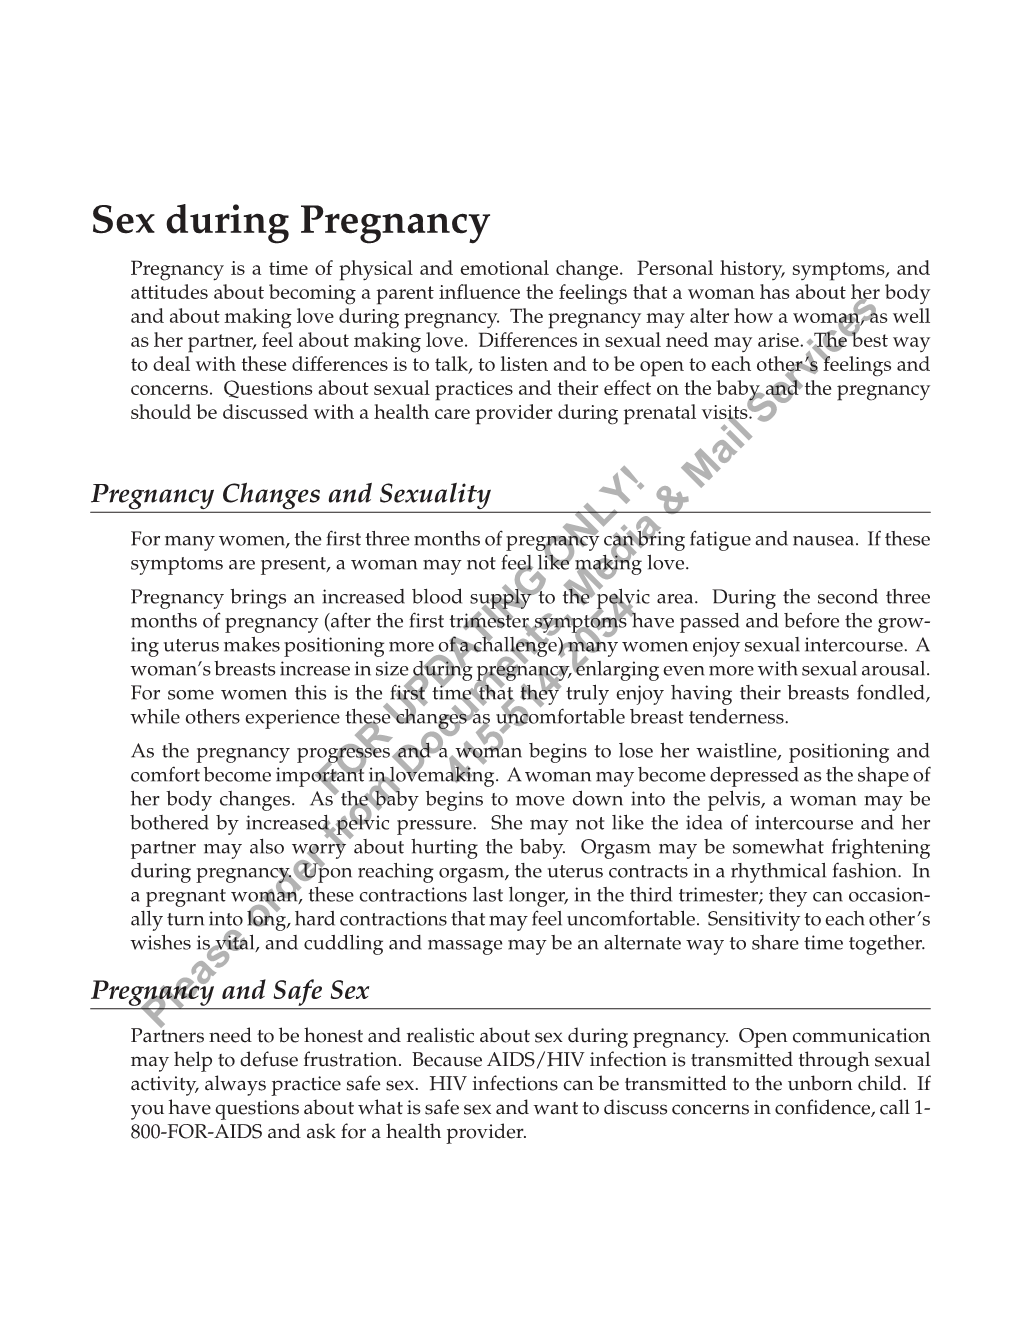 Sex During Pregnancy for UPDATING ONLY! Please Order